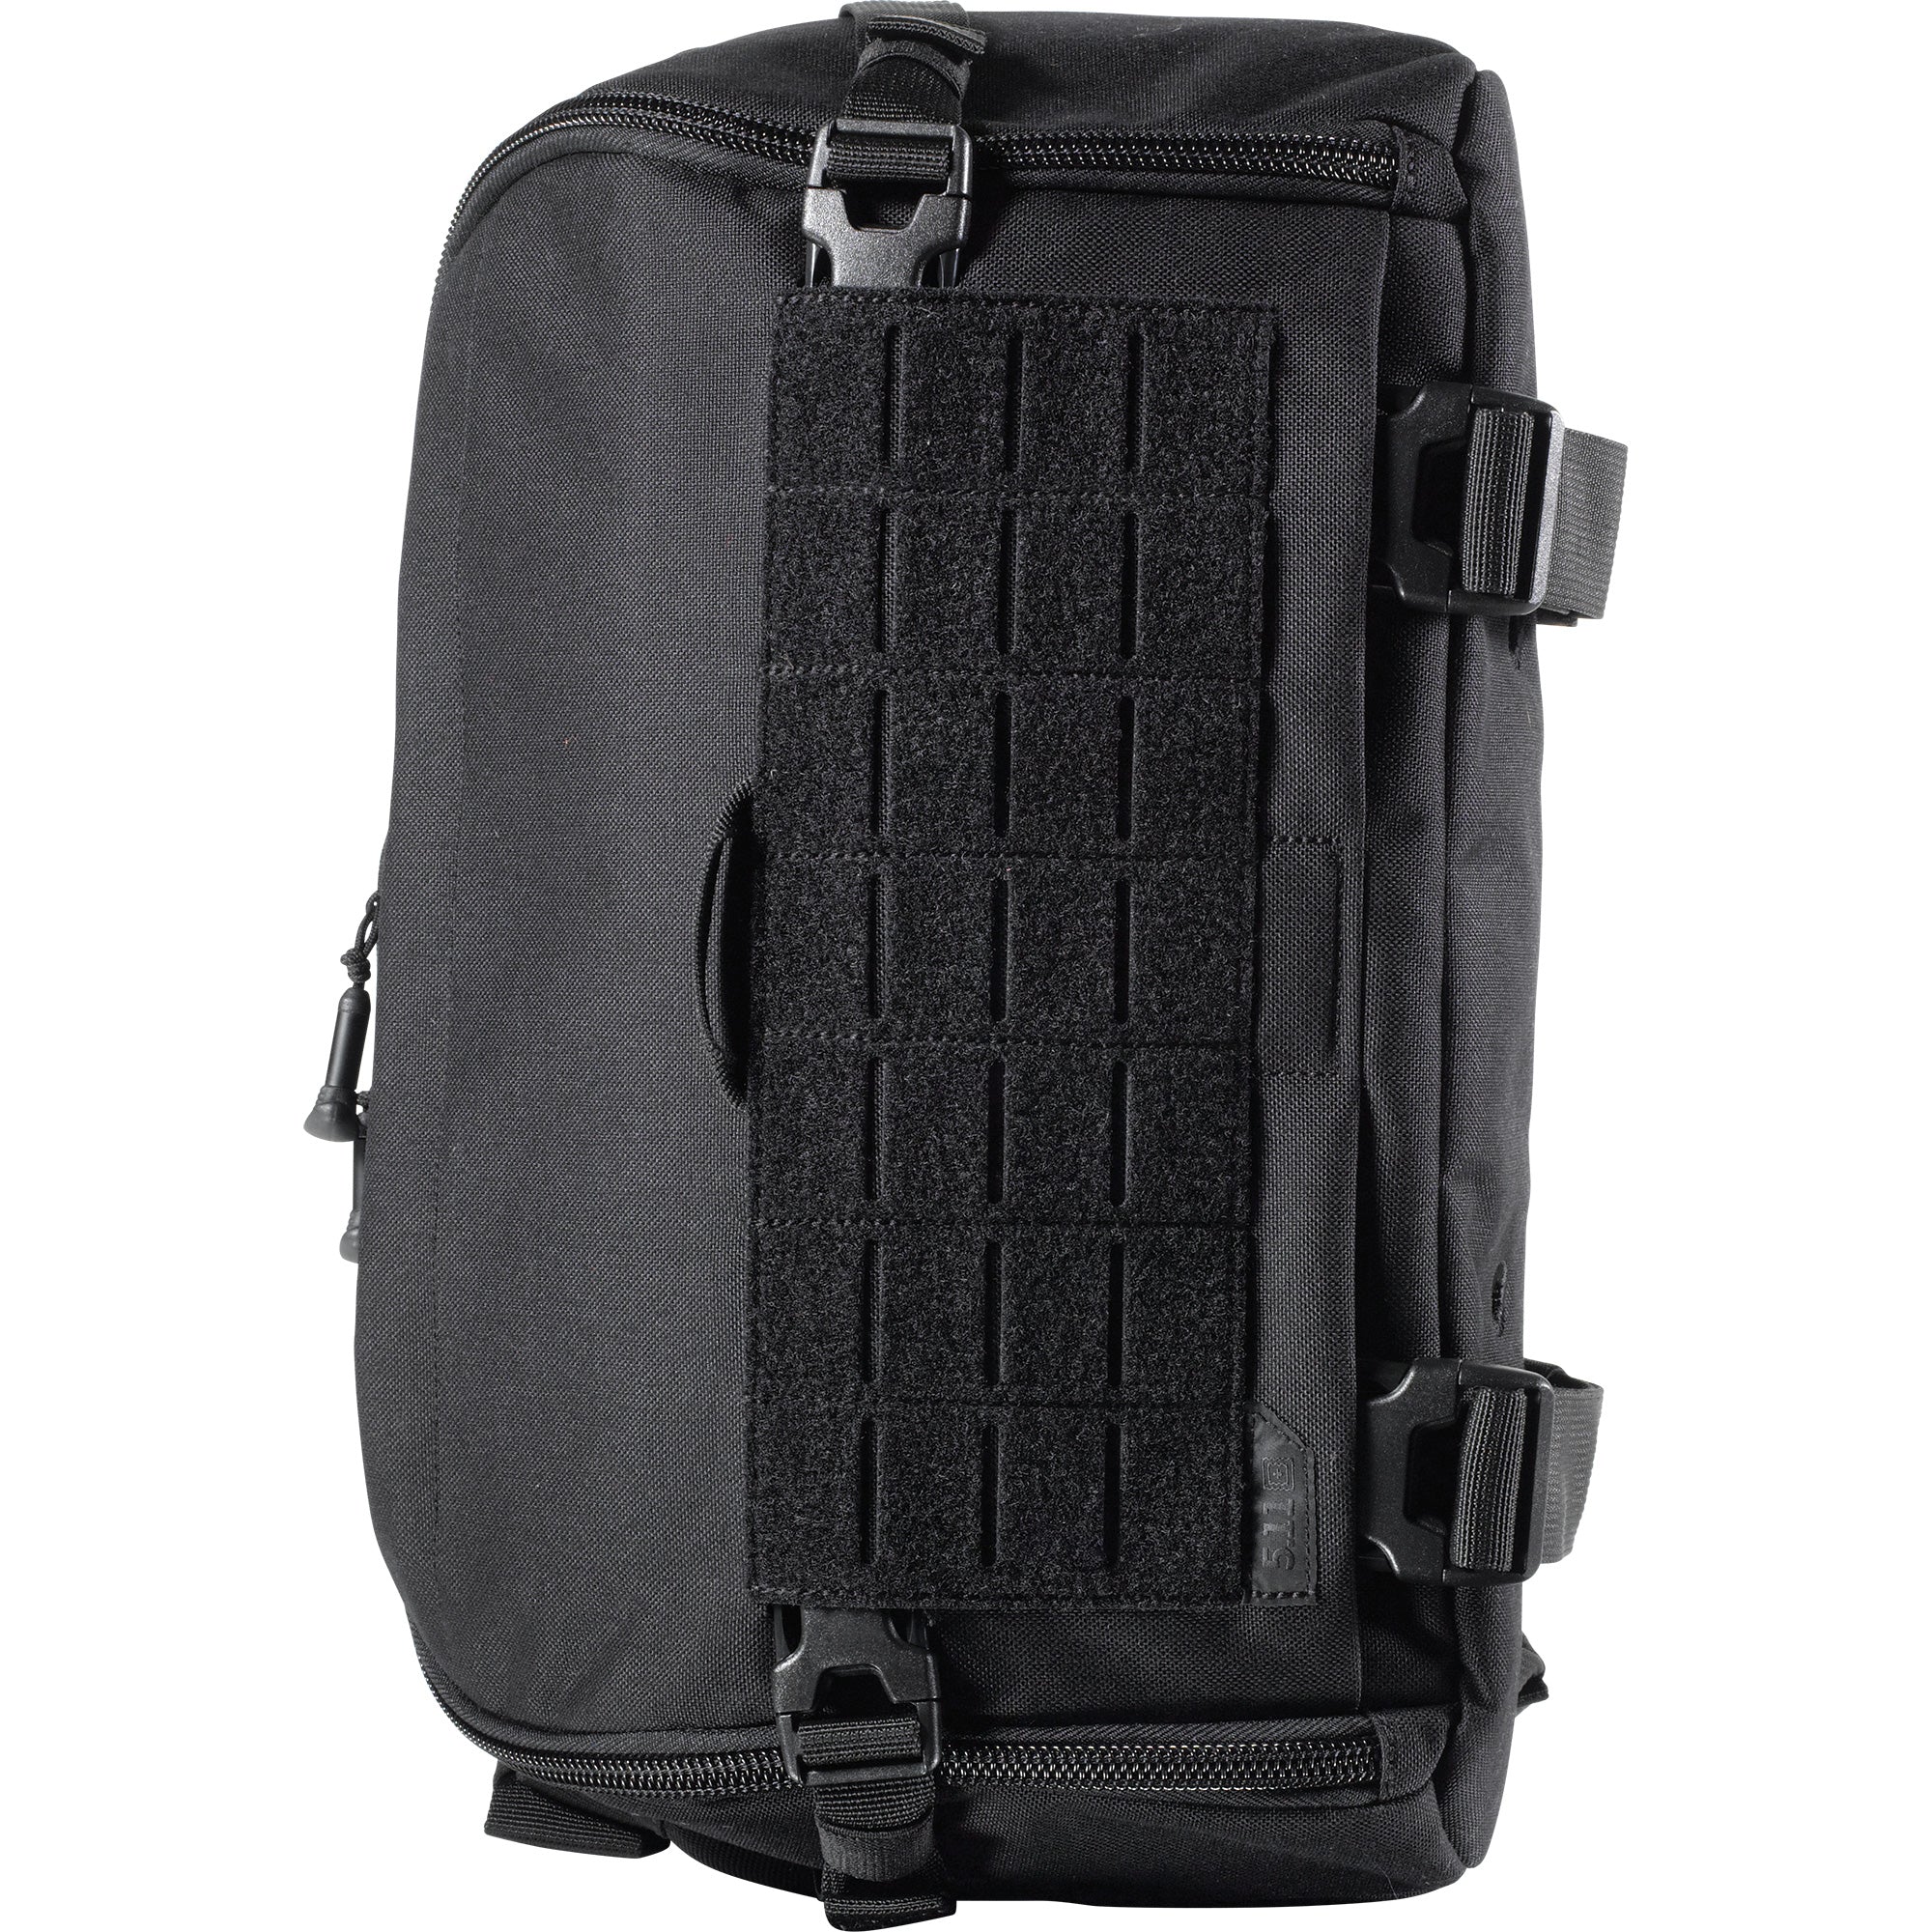 5.11 Tactical Select Carry Sling Pack